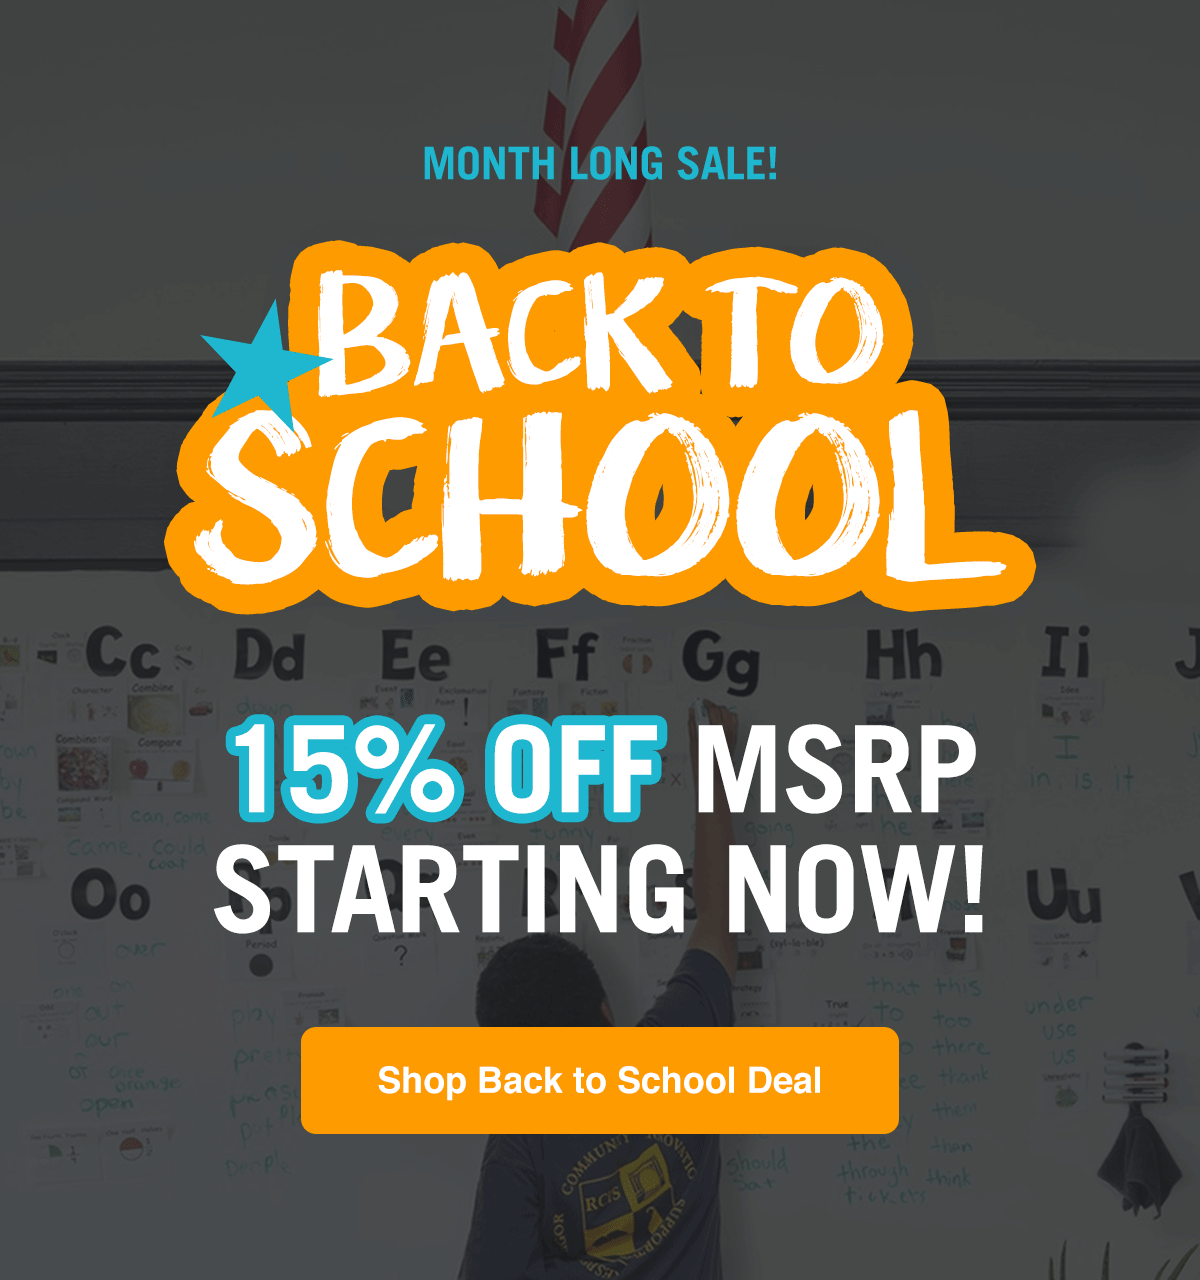 Back to School Month Long Sale! 15% off MSRP starting now!